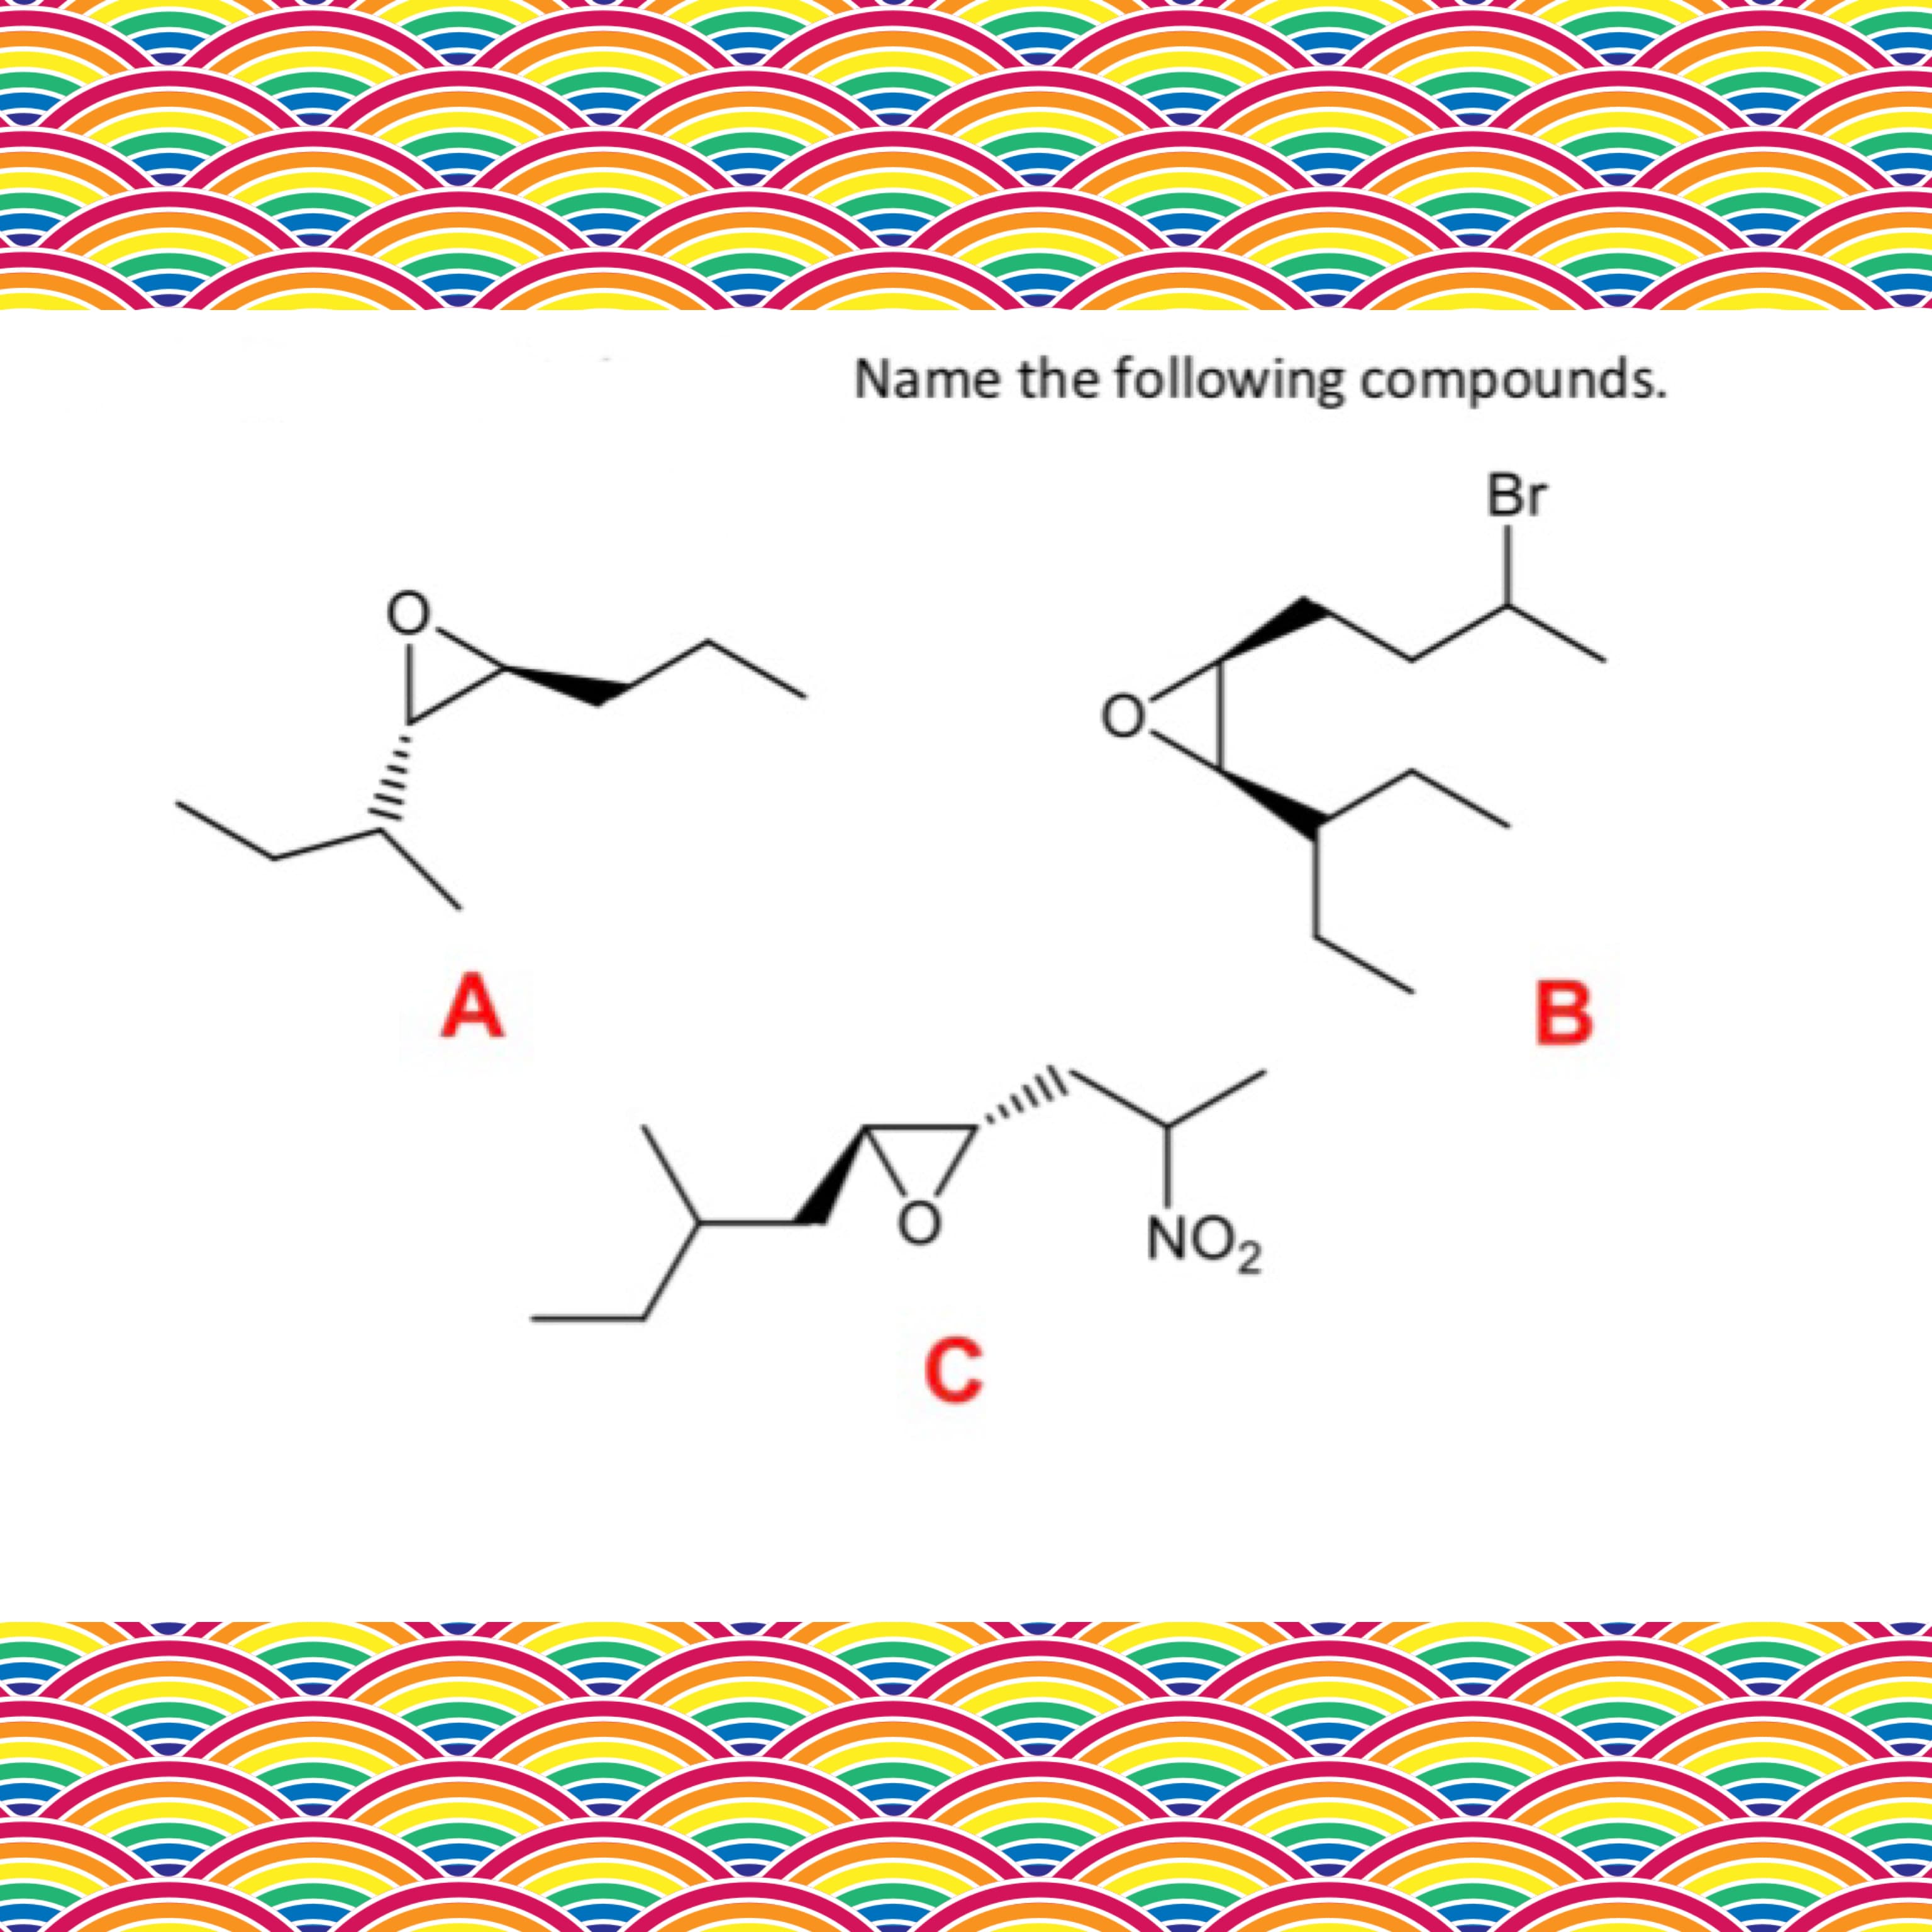 Name the following compounds.
Br
A
NO2
C
